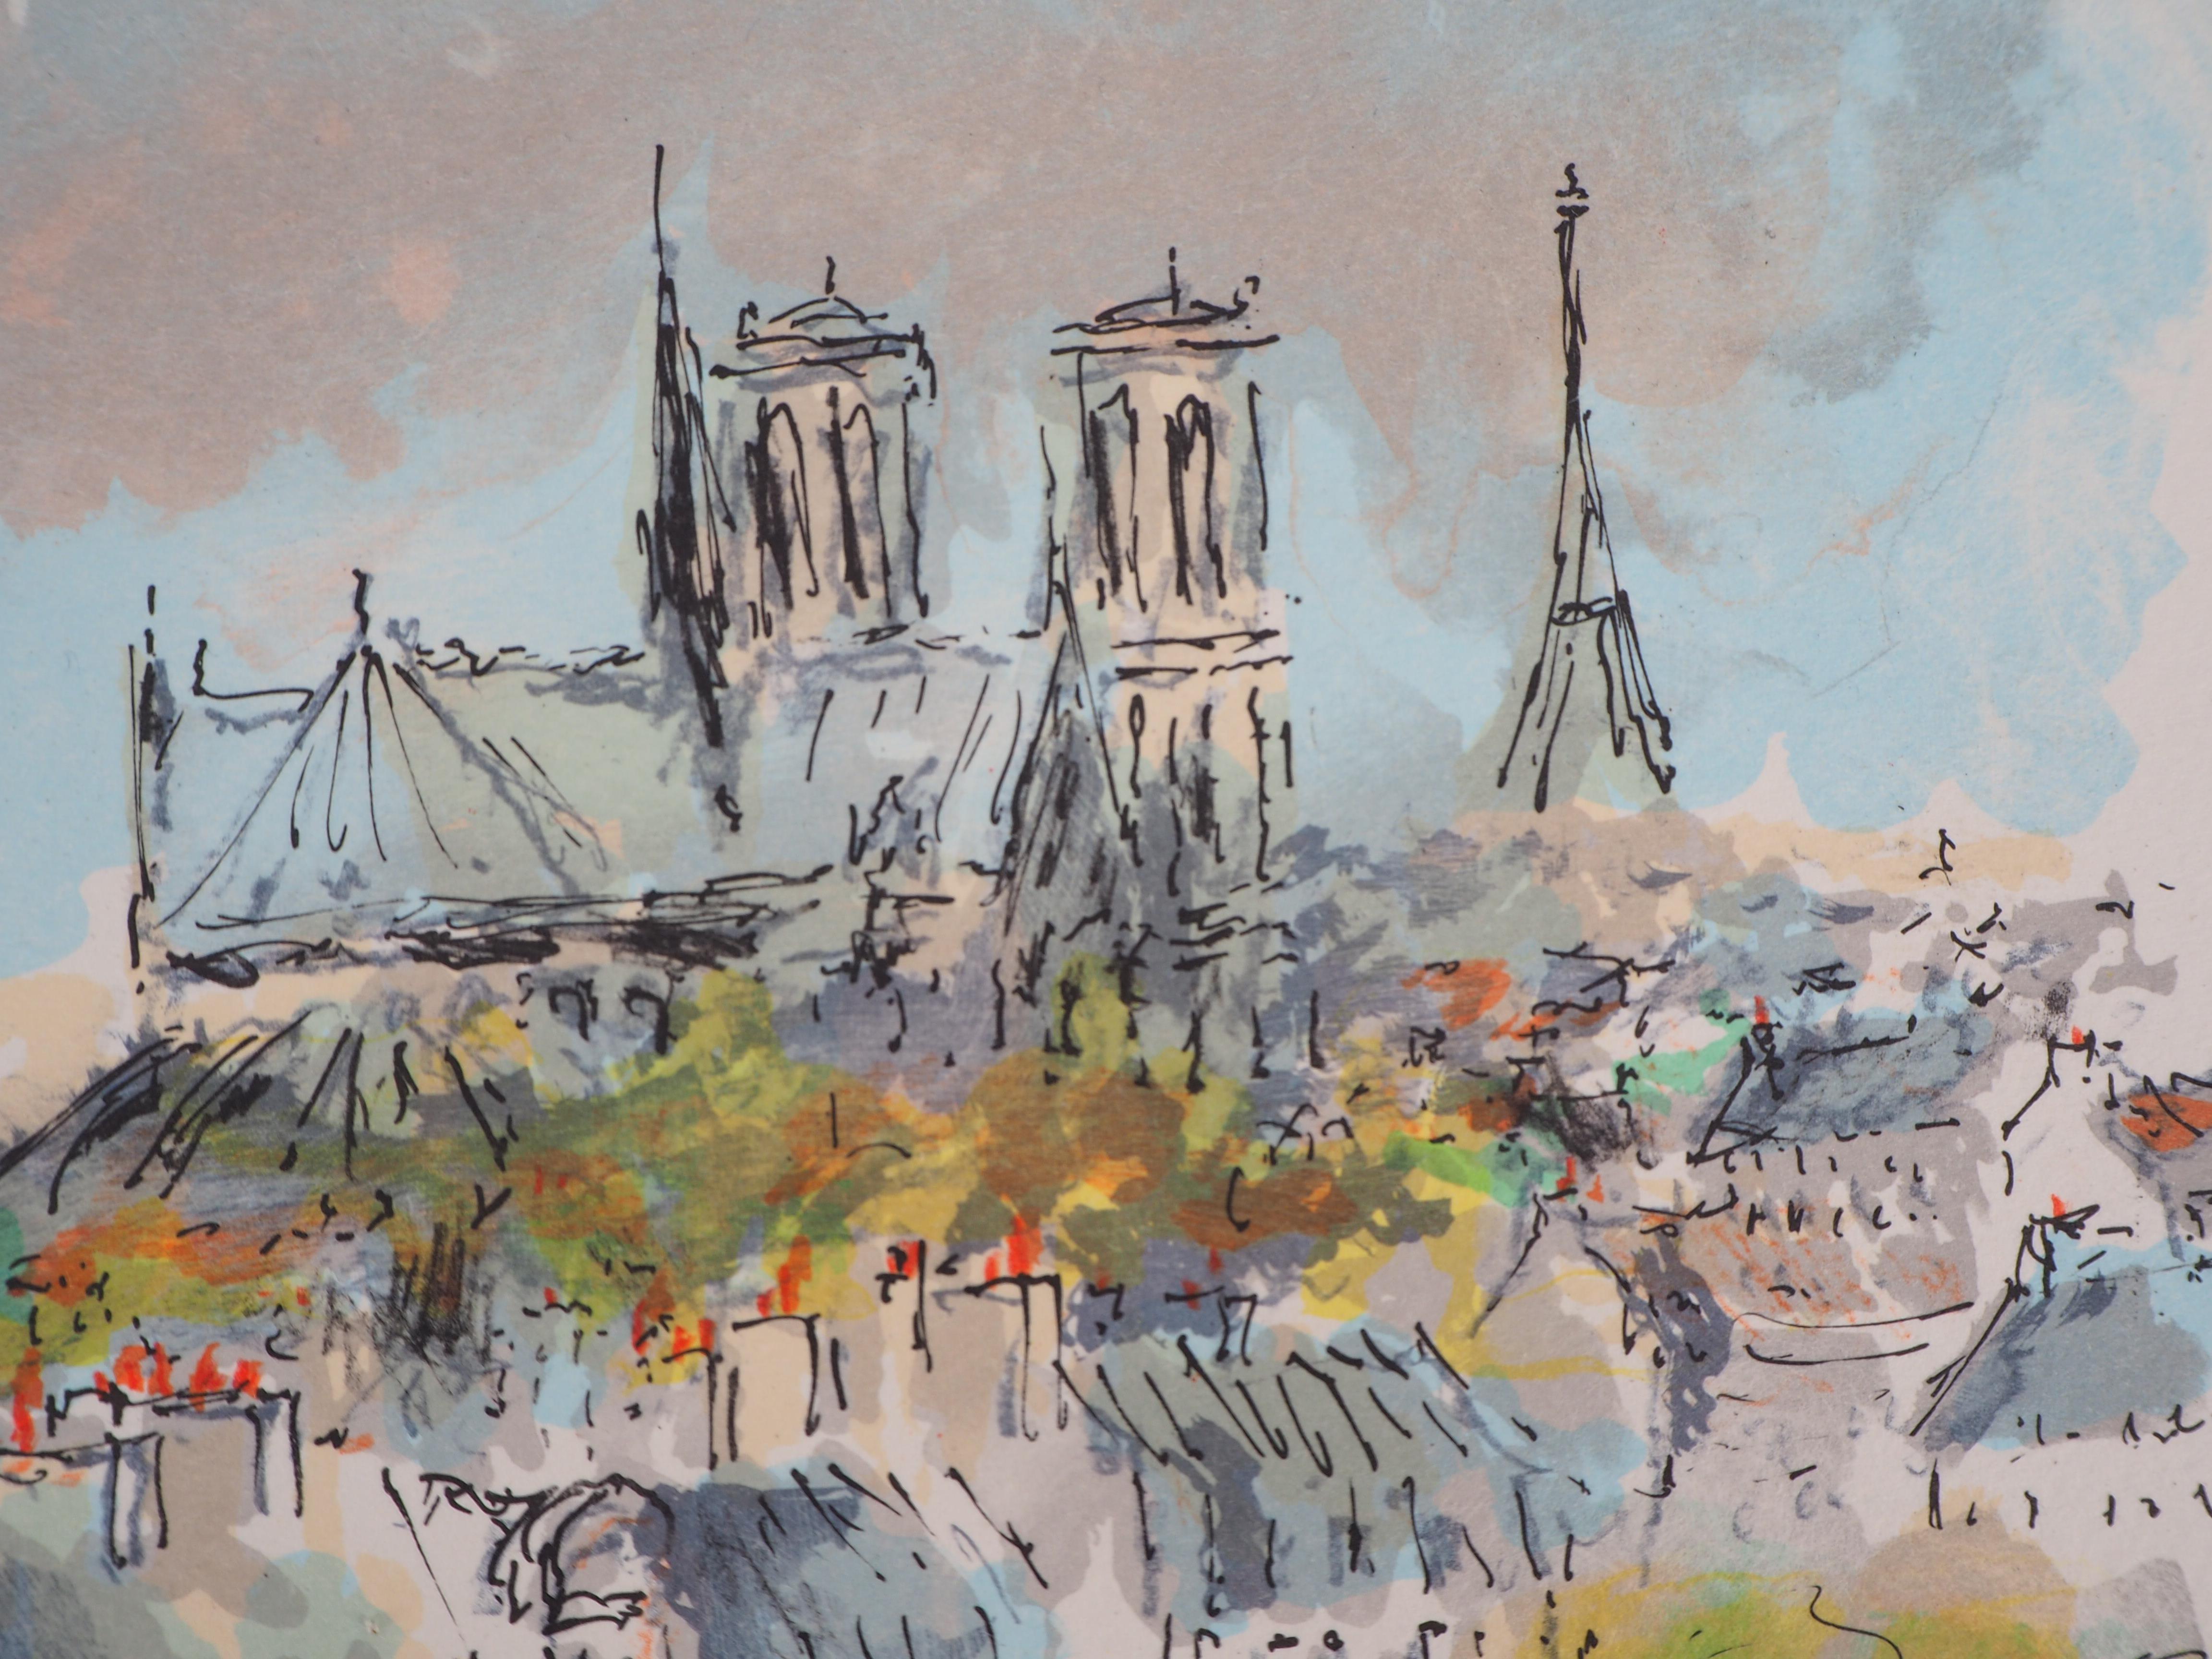 Roofs of Paris and Notre Dame - Original Lithograph Handsigned  - Modern Print by Urbain Huchet